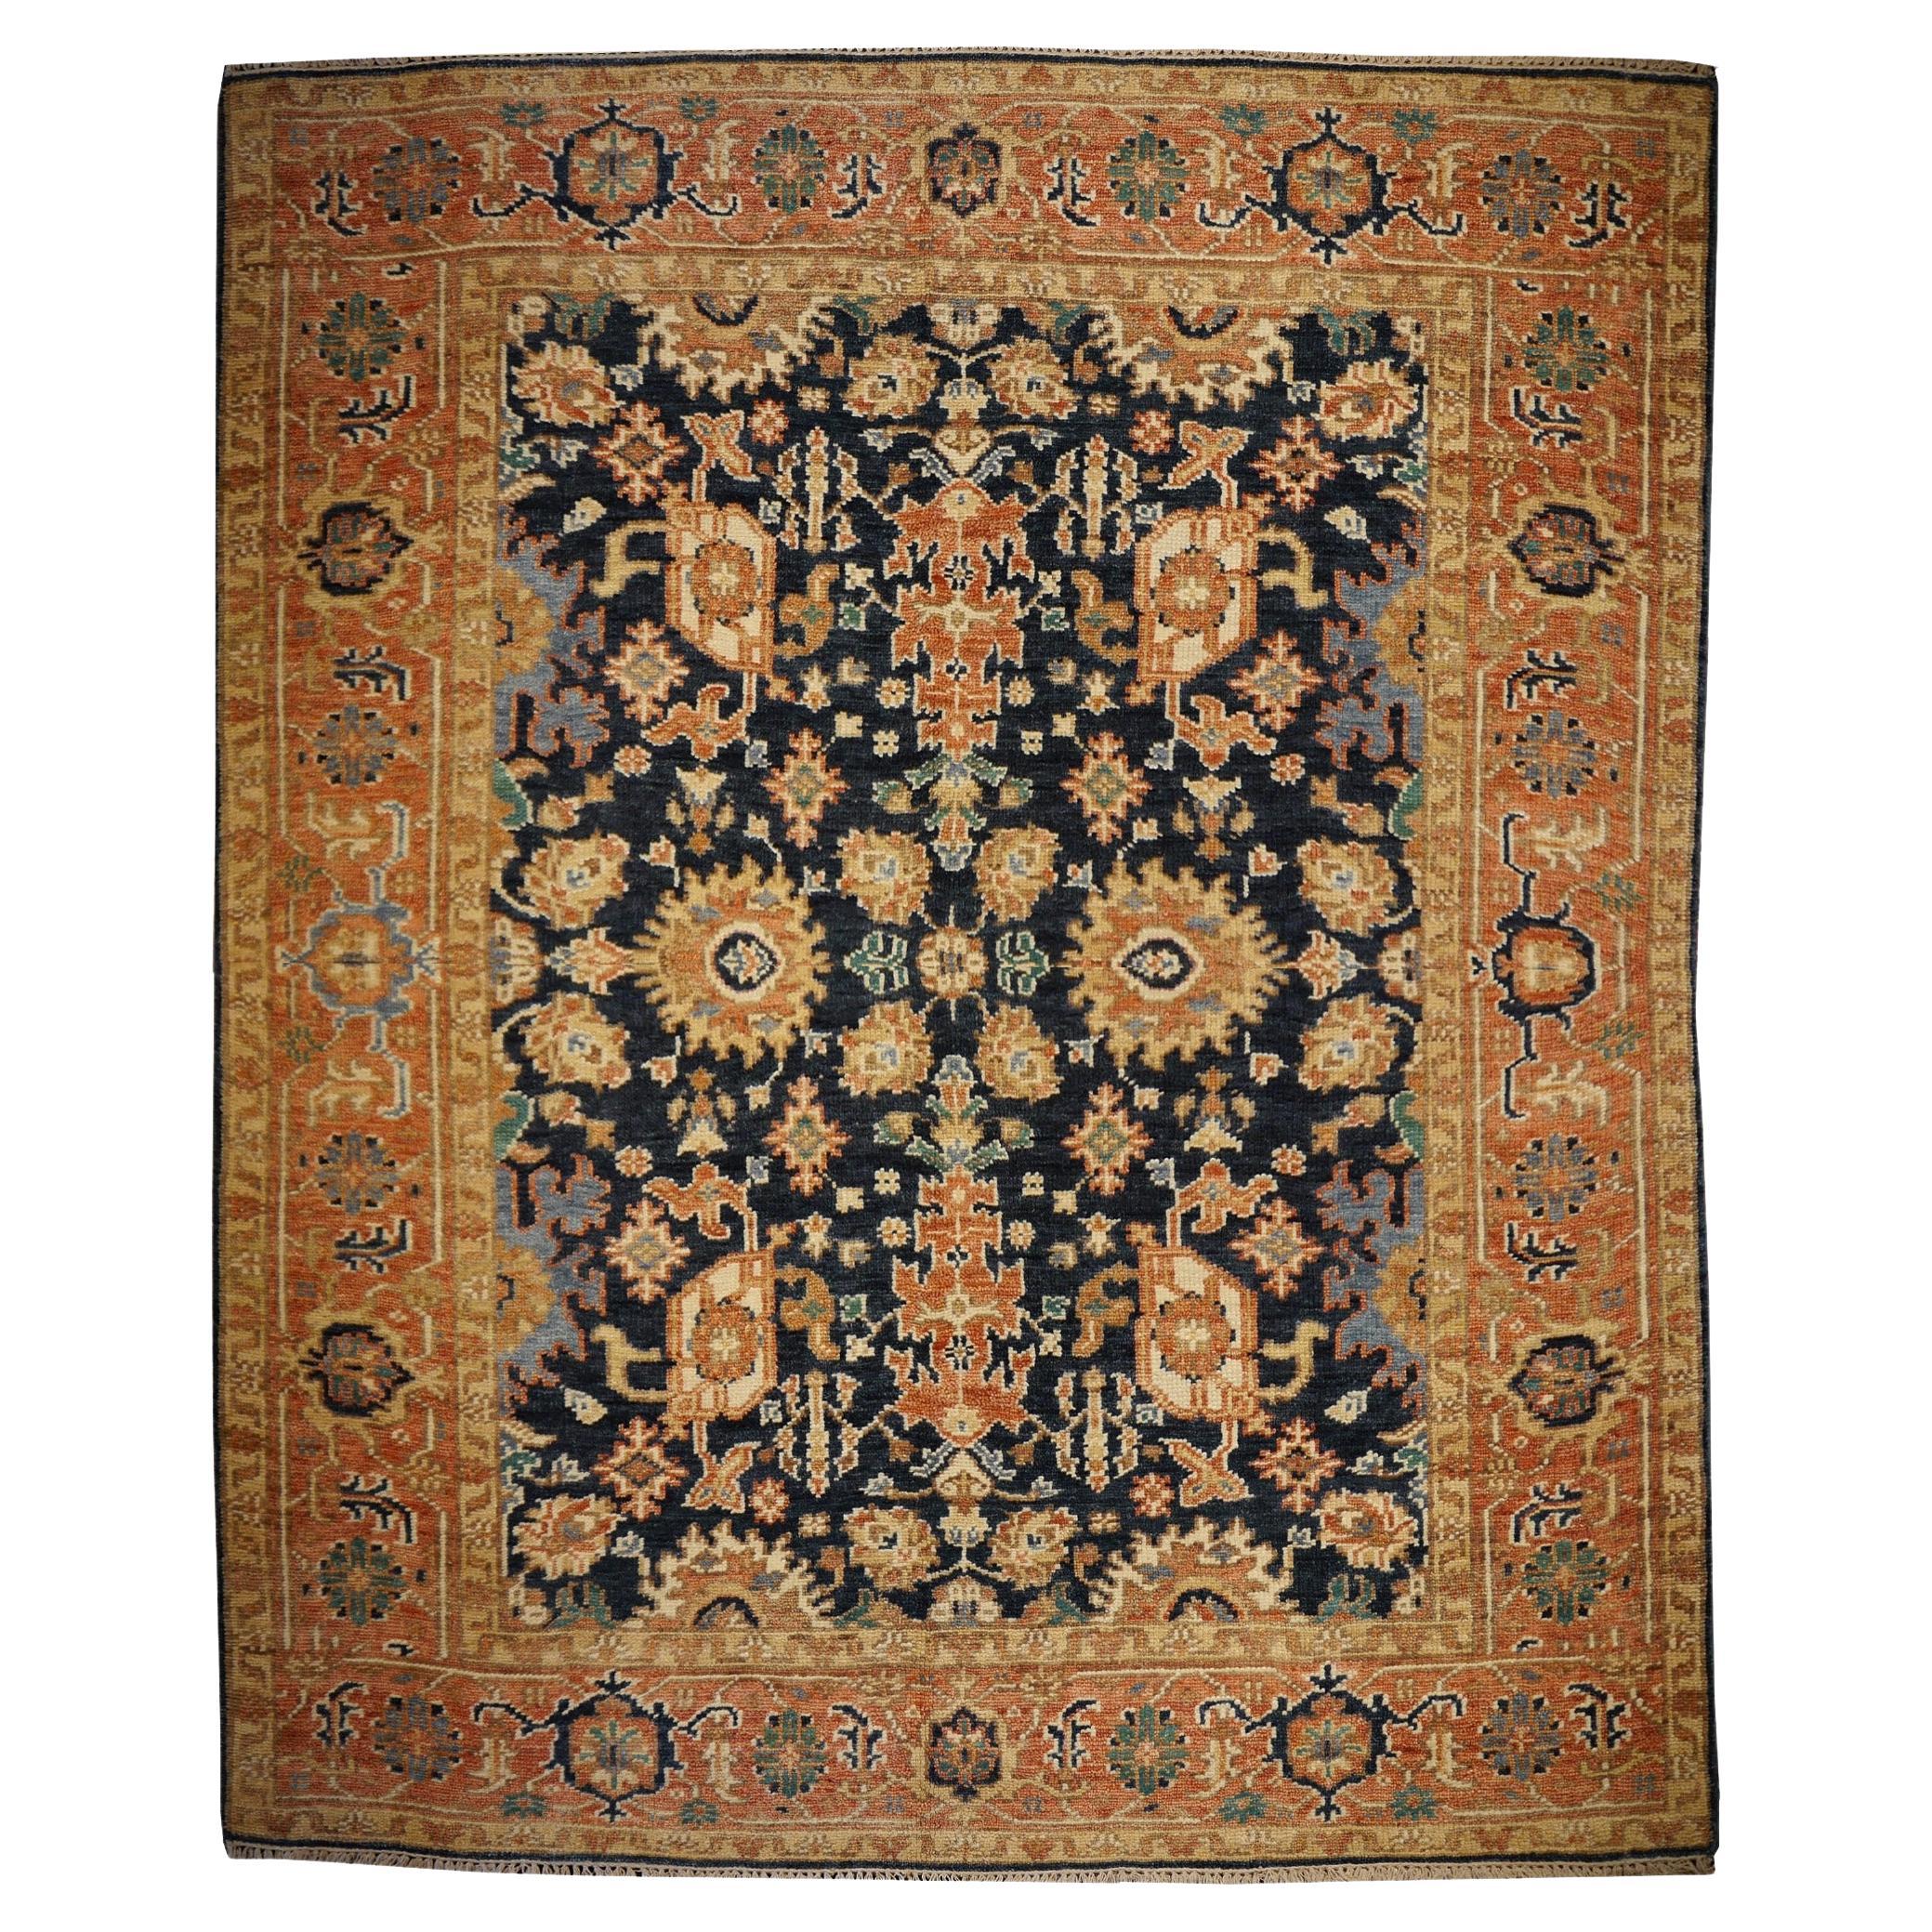 Heriz Rug Hand Knotted Low Wool Pile Vintage Look Djoharian Collection For Sale